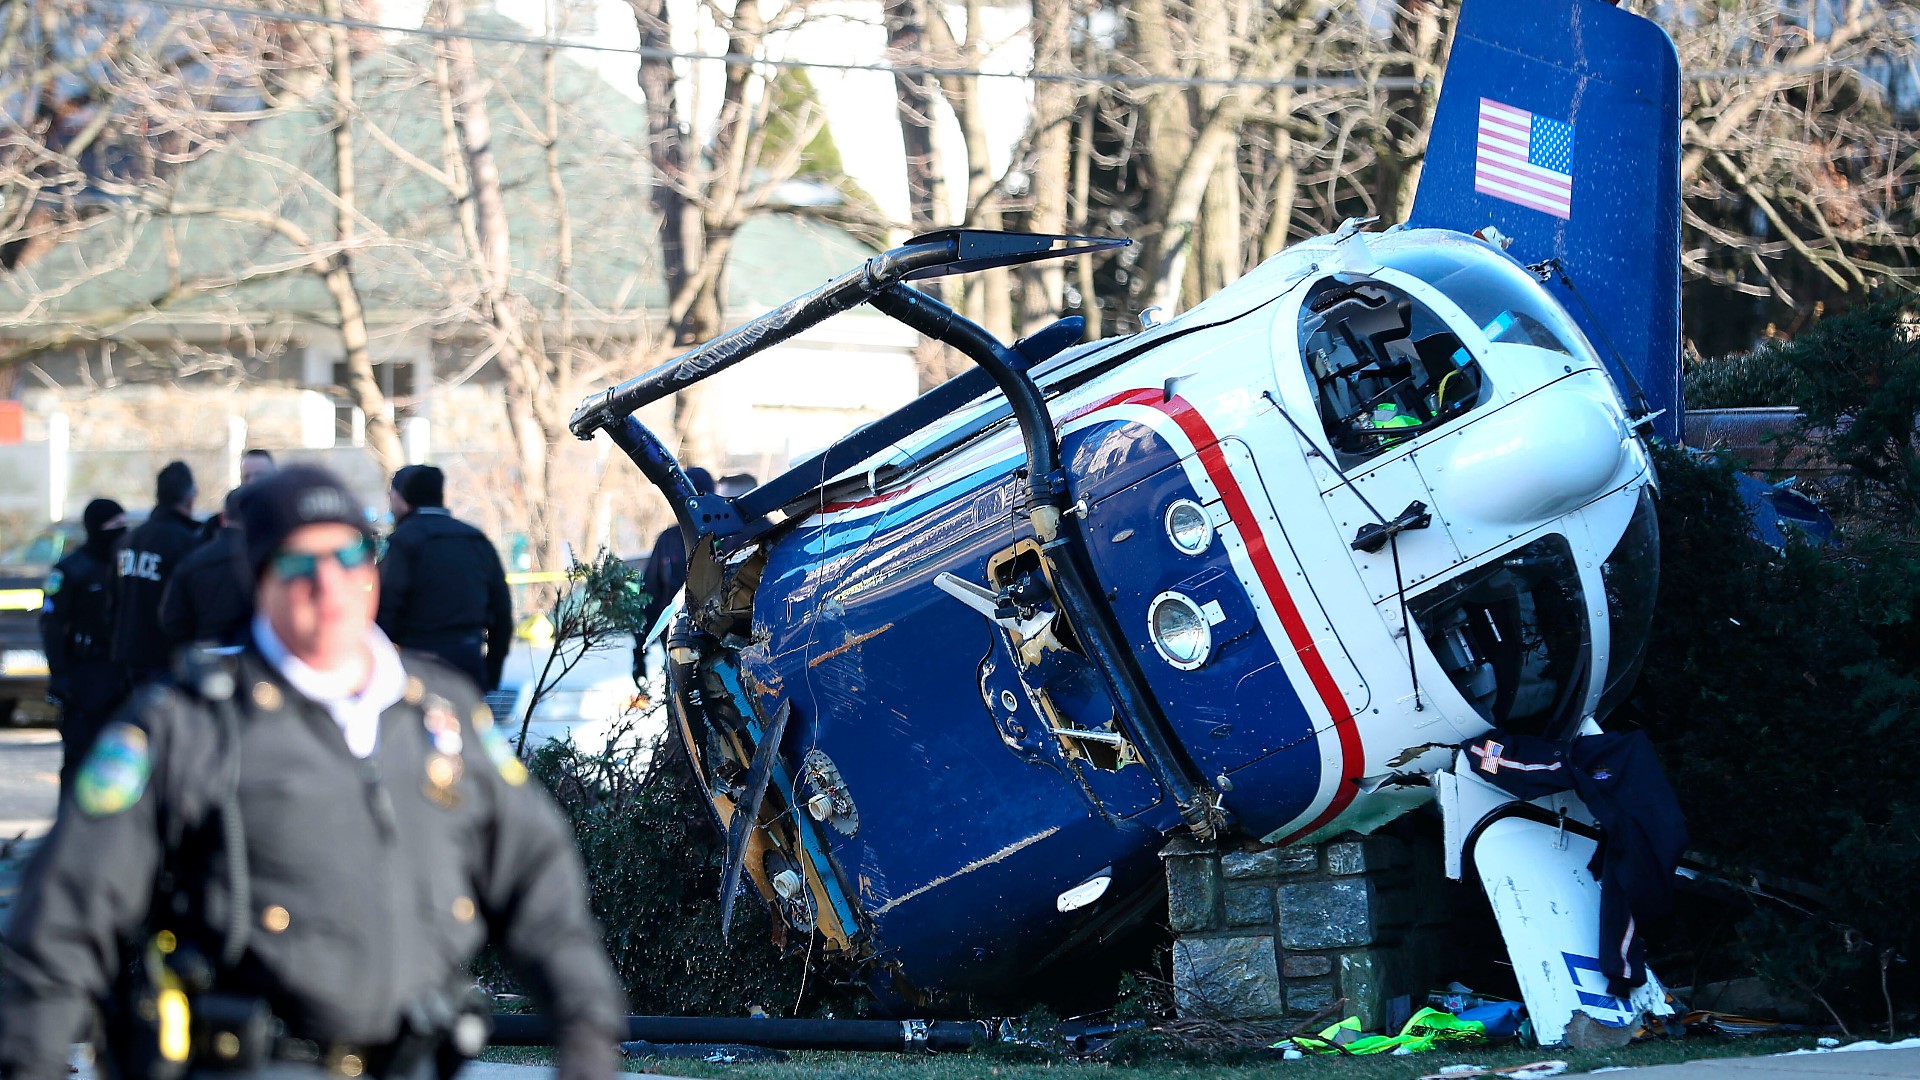 Police say rescue crews rushed to the crash near a church in suburban Philadelphia and helped pull the pilot, two crew members and infant patient from the aircraft.